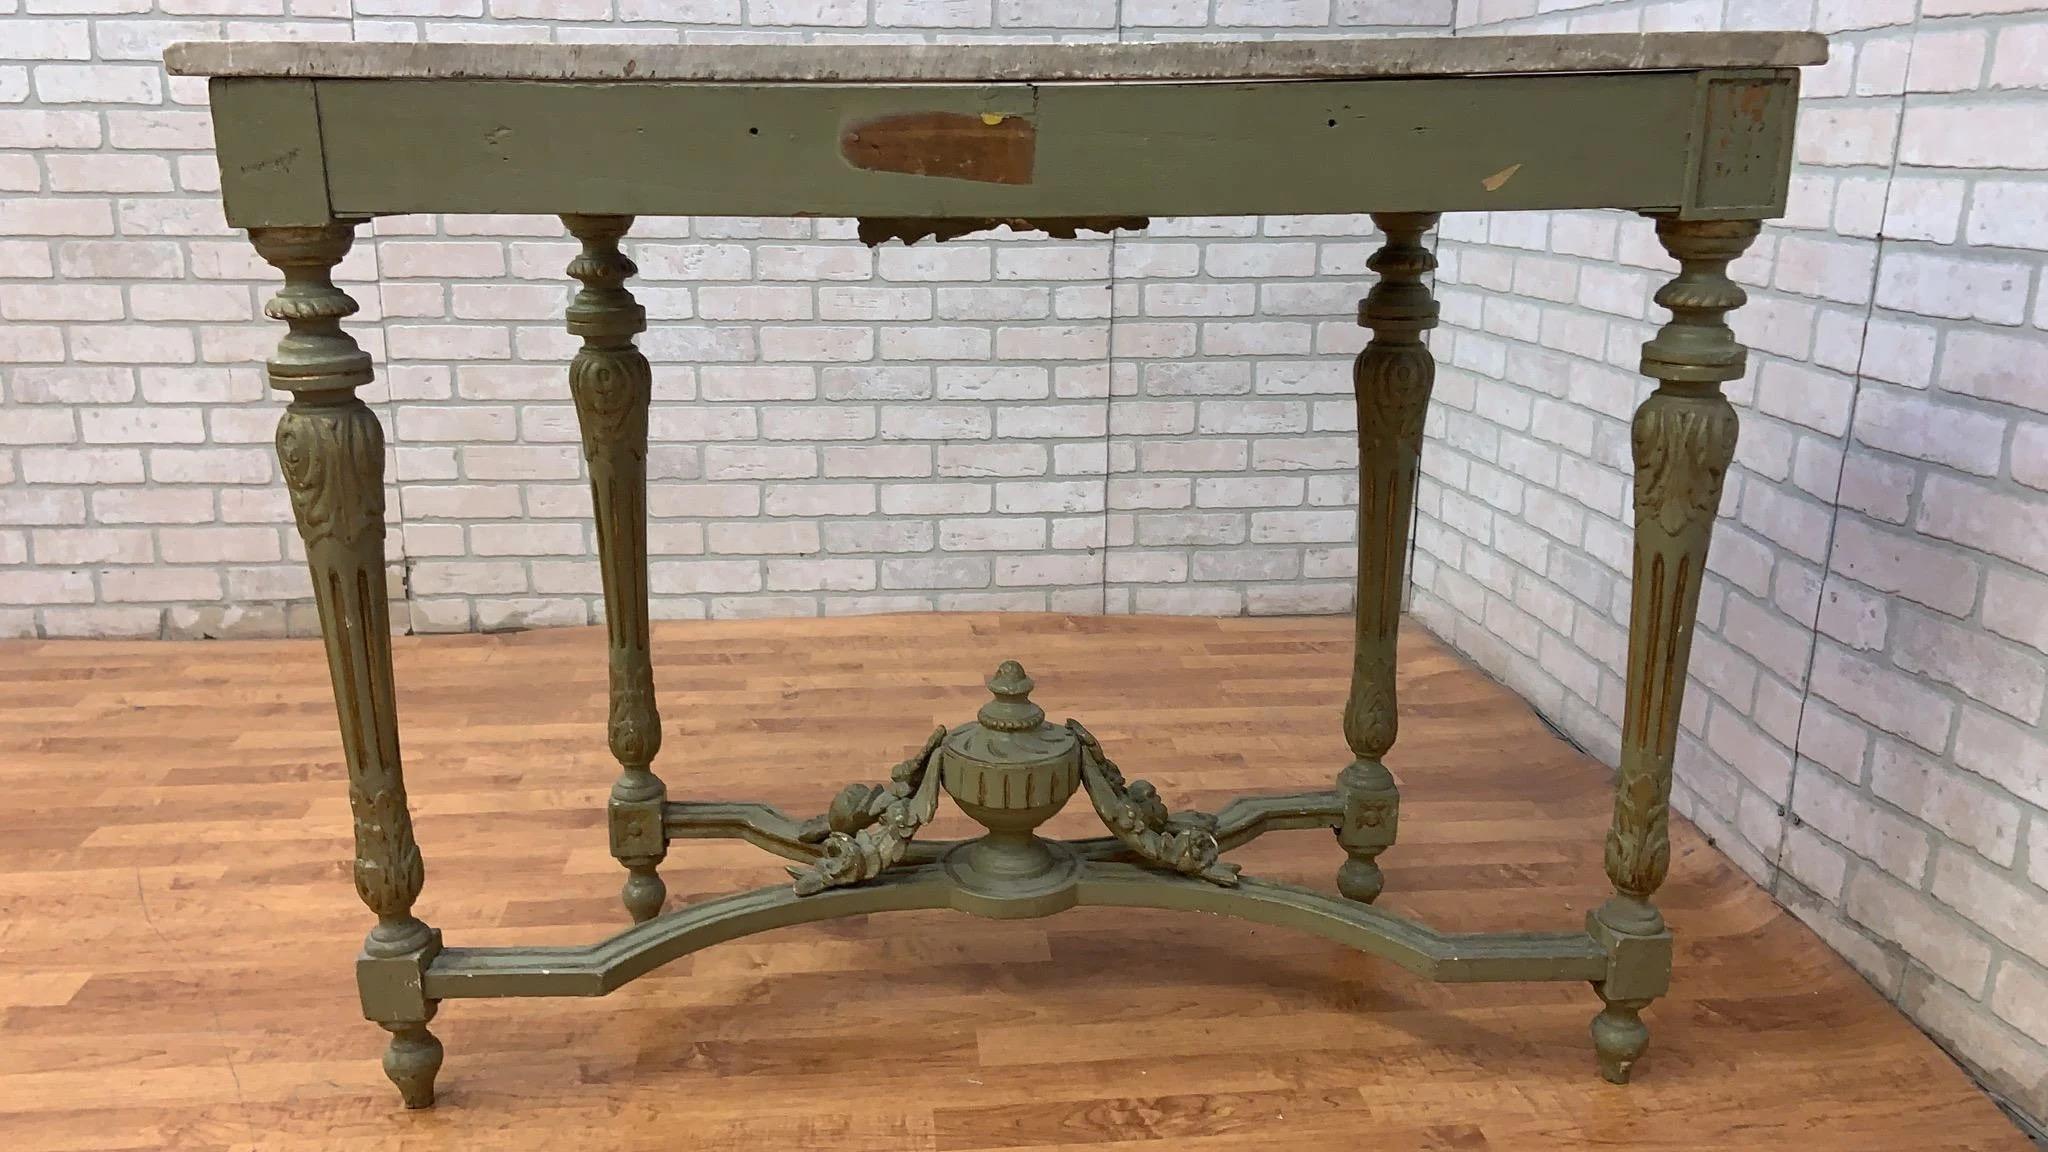 Vintage Opulent French Neoclassical Green Painted Console with Italian Carrara Marble Top

Elevate your decor with this opulent French Neoclassical console table. This finely carved masterpiece features a striking green painted finish adorned with